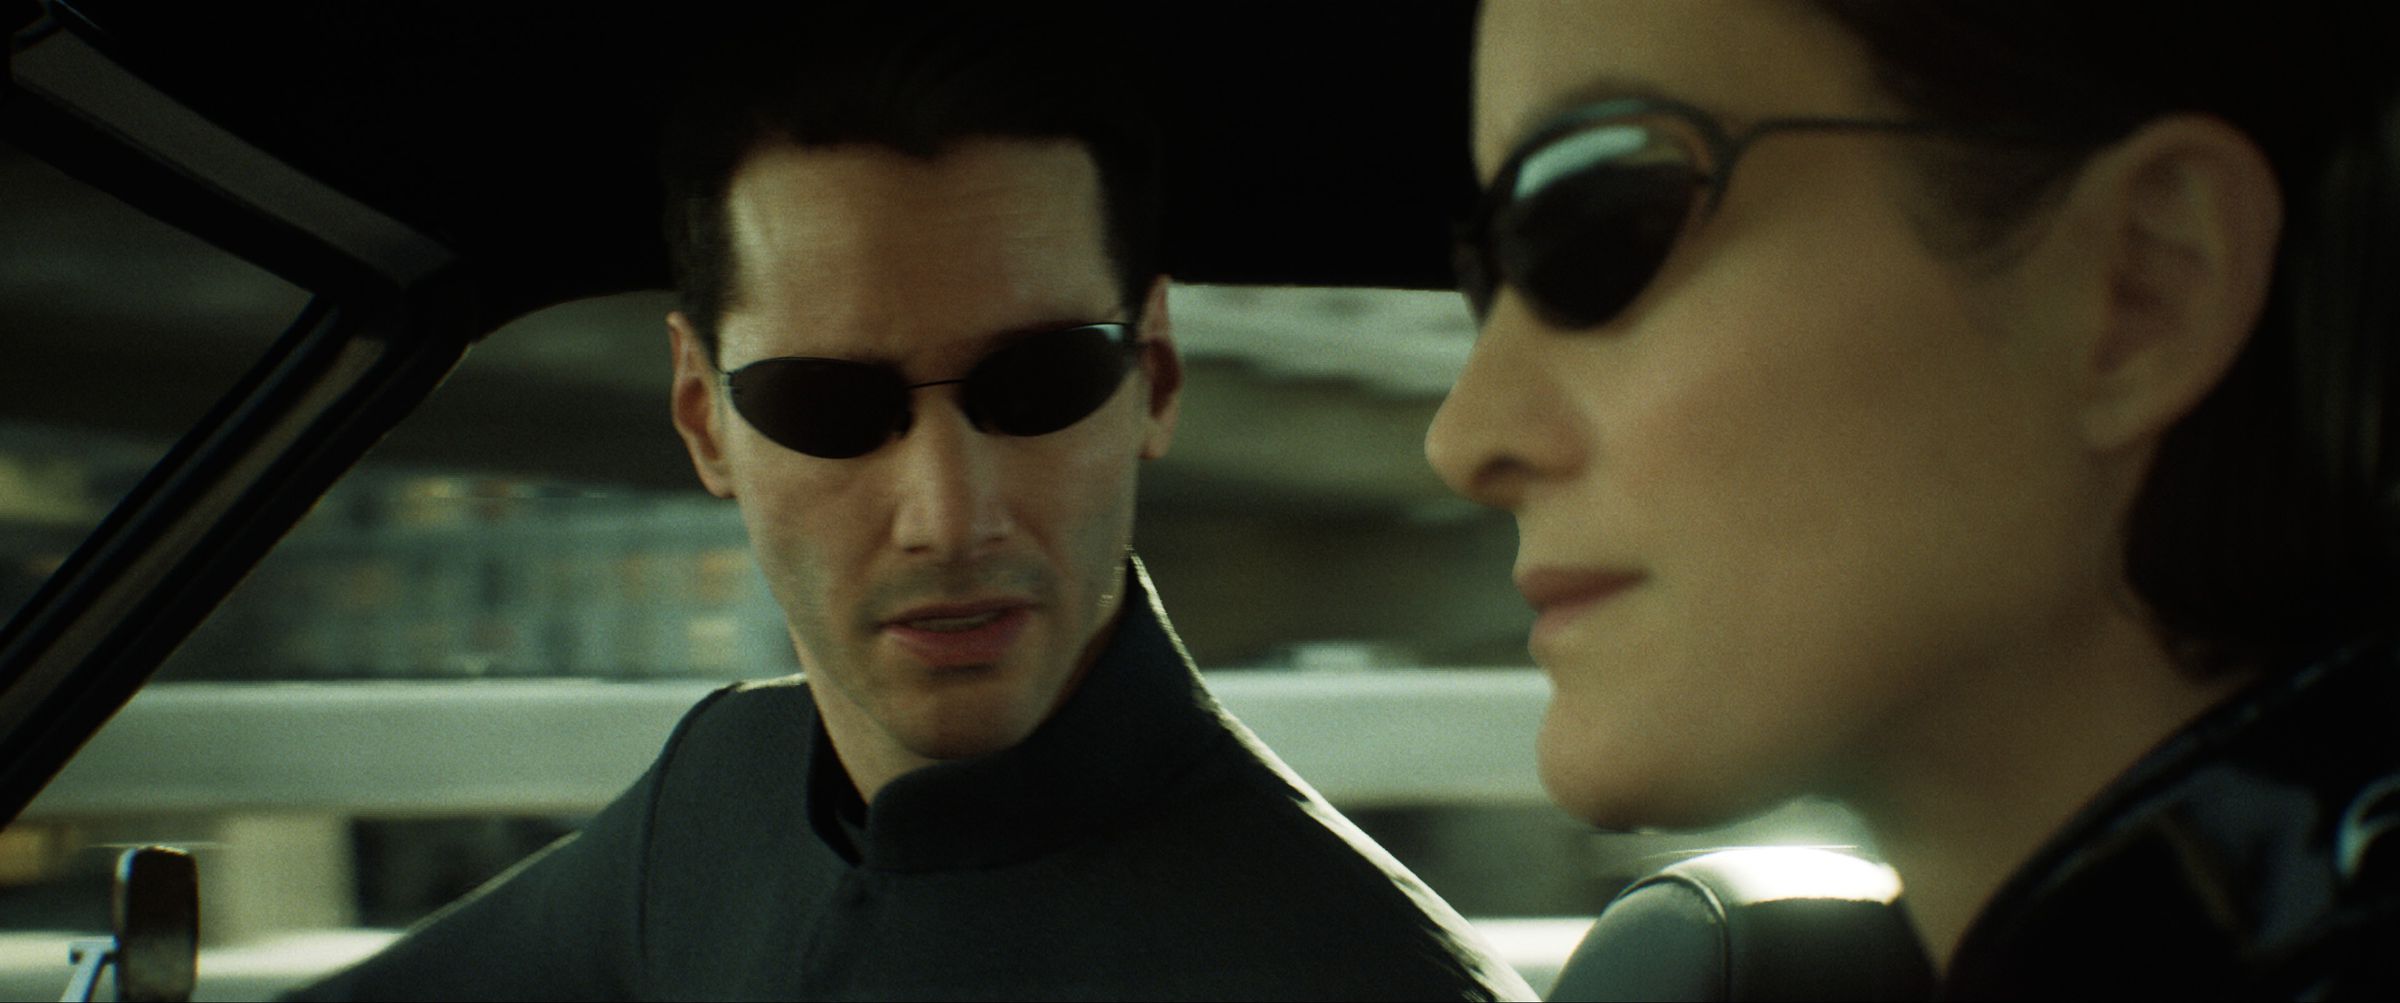 Image of a virtual Neo and Trinity from the Matrix, driving in a car wearing sunglasses.